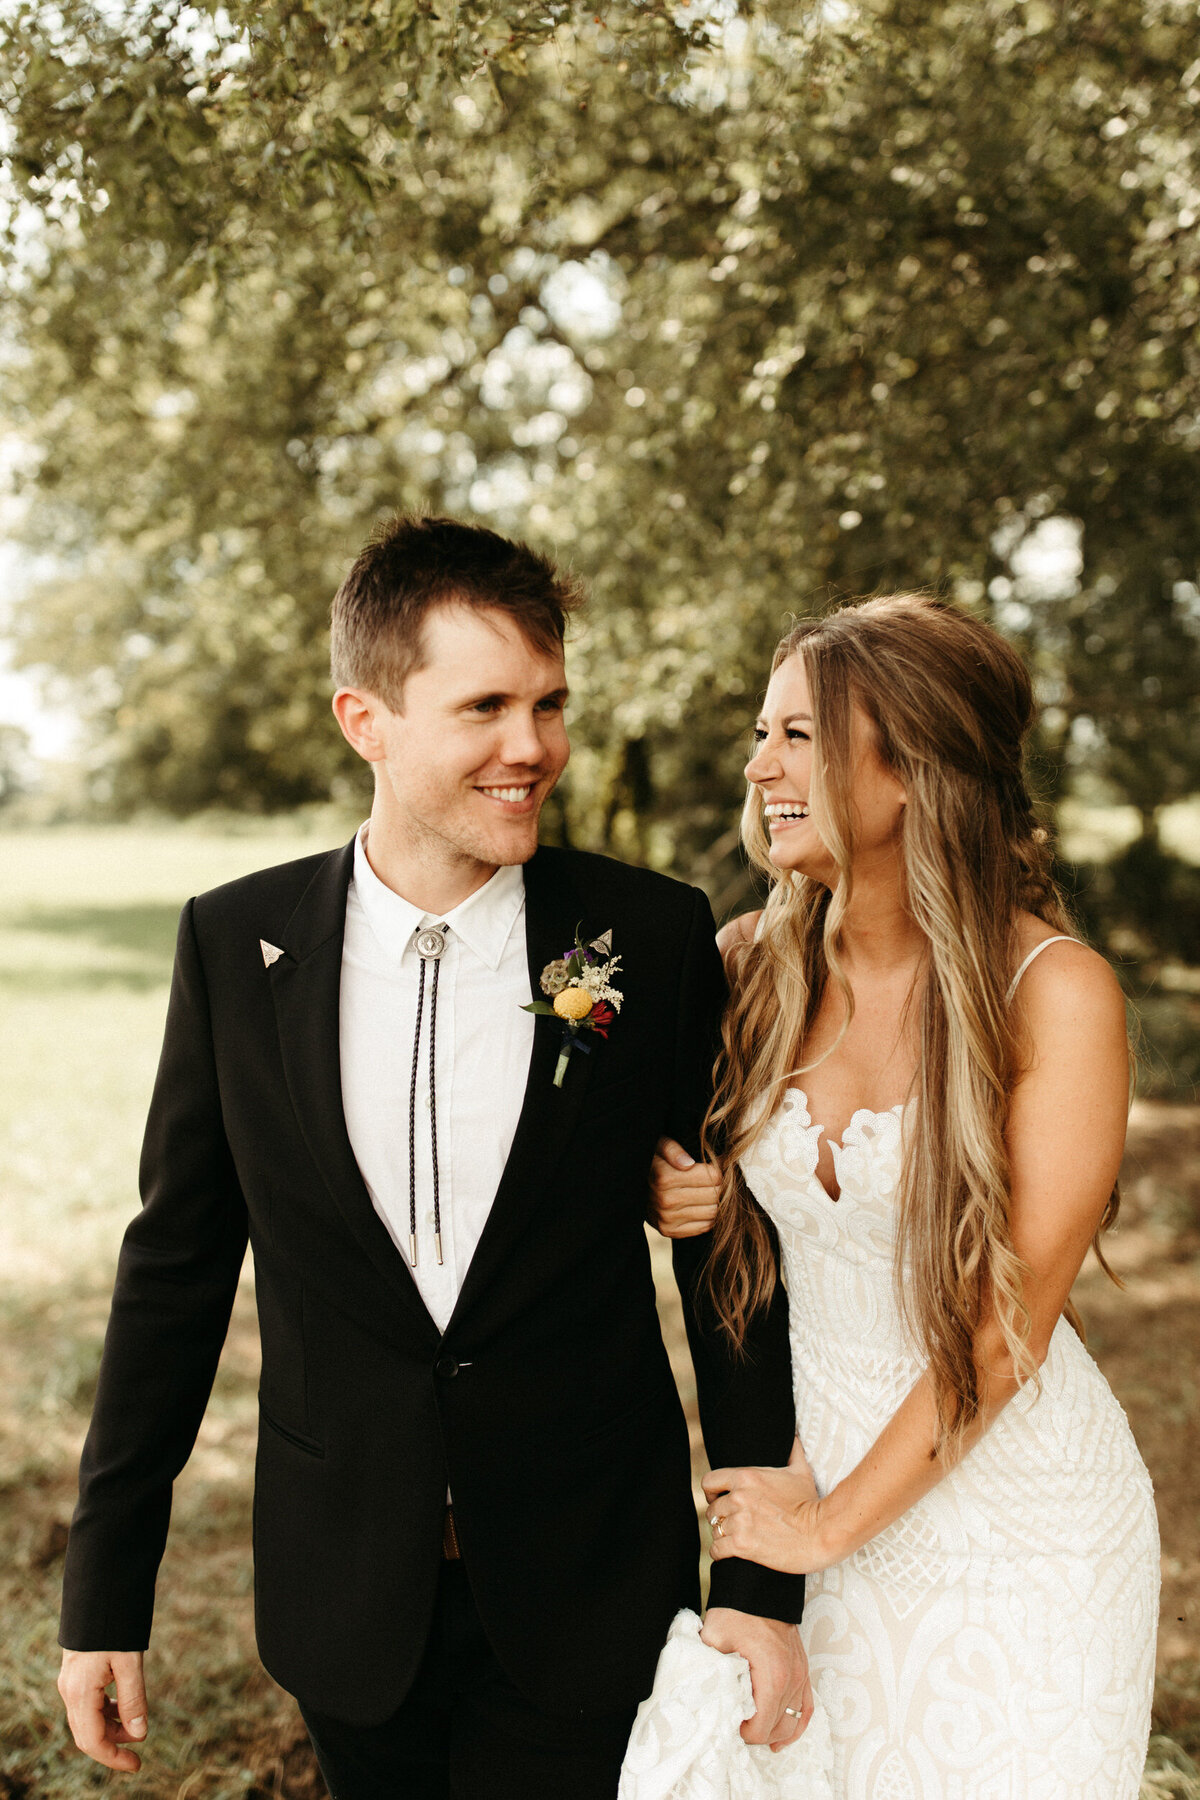 Bride holding groom's arm and looking at him while they laugh and walk together